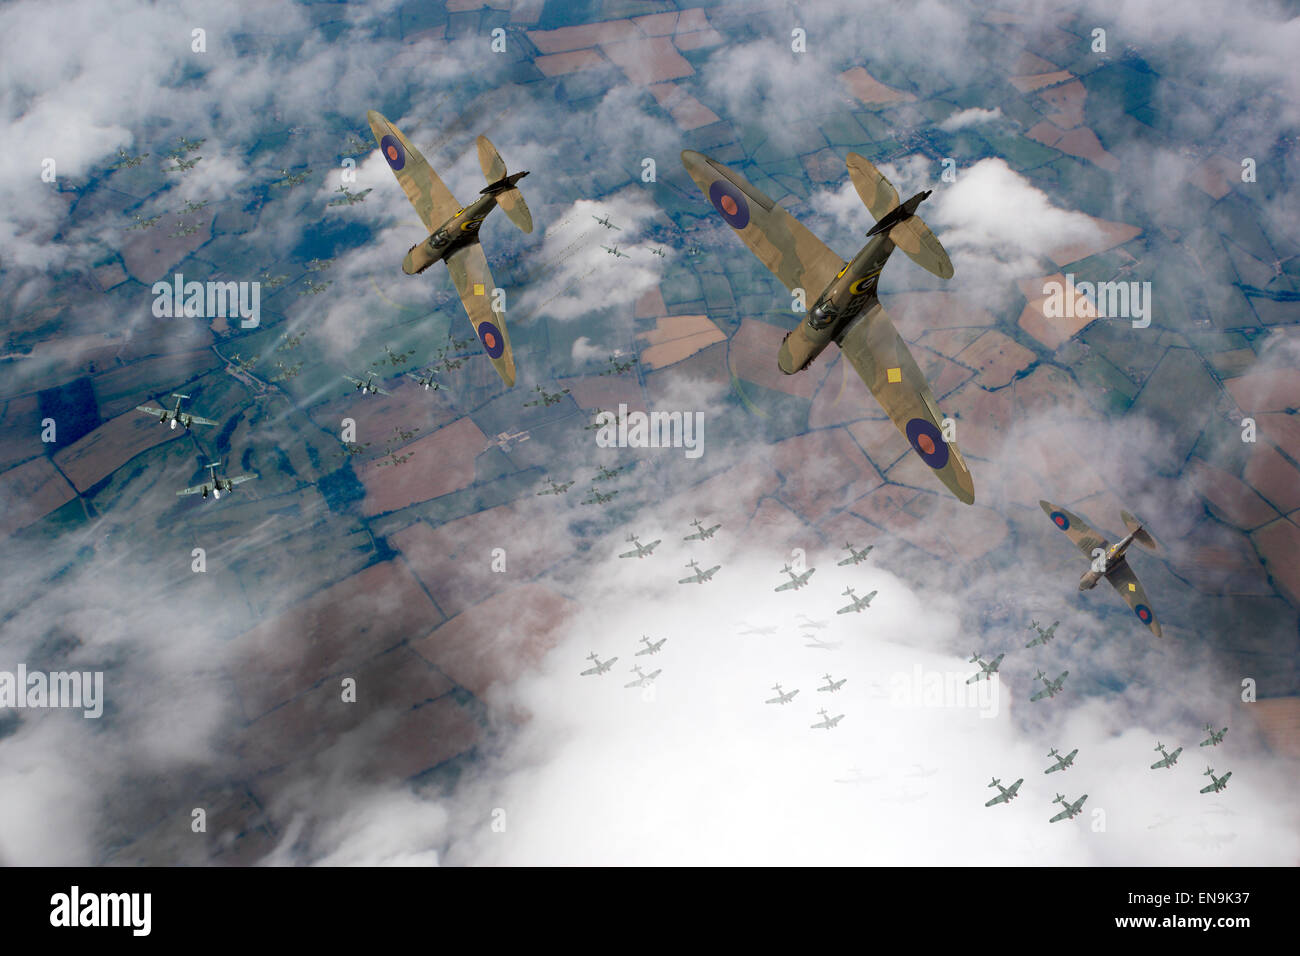 RAF Spitfires locate the Luftwaffe bomber formation they have been vectored to intercept over England in the summer of 1940. Stock Photo